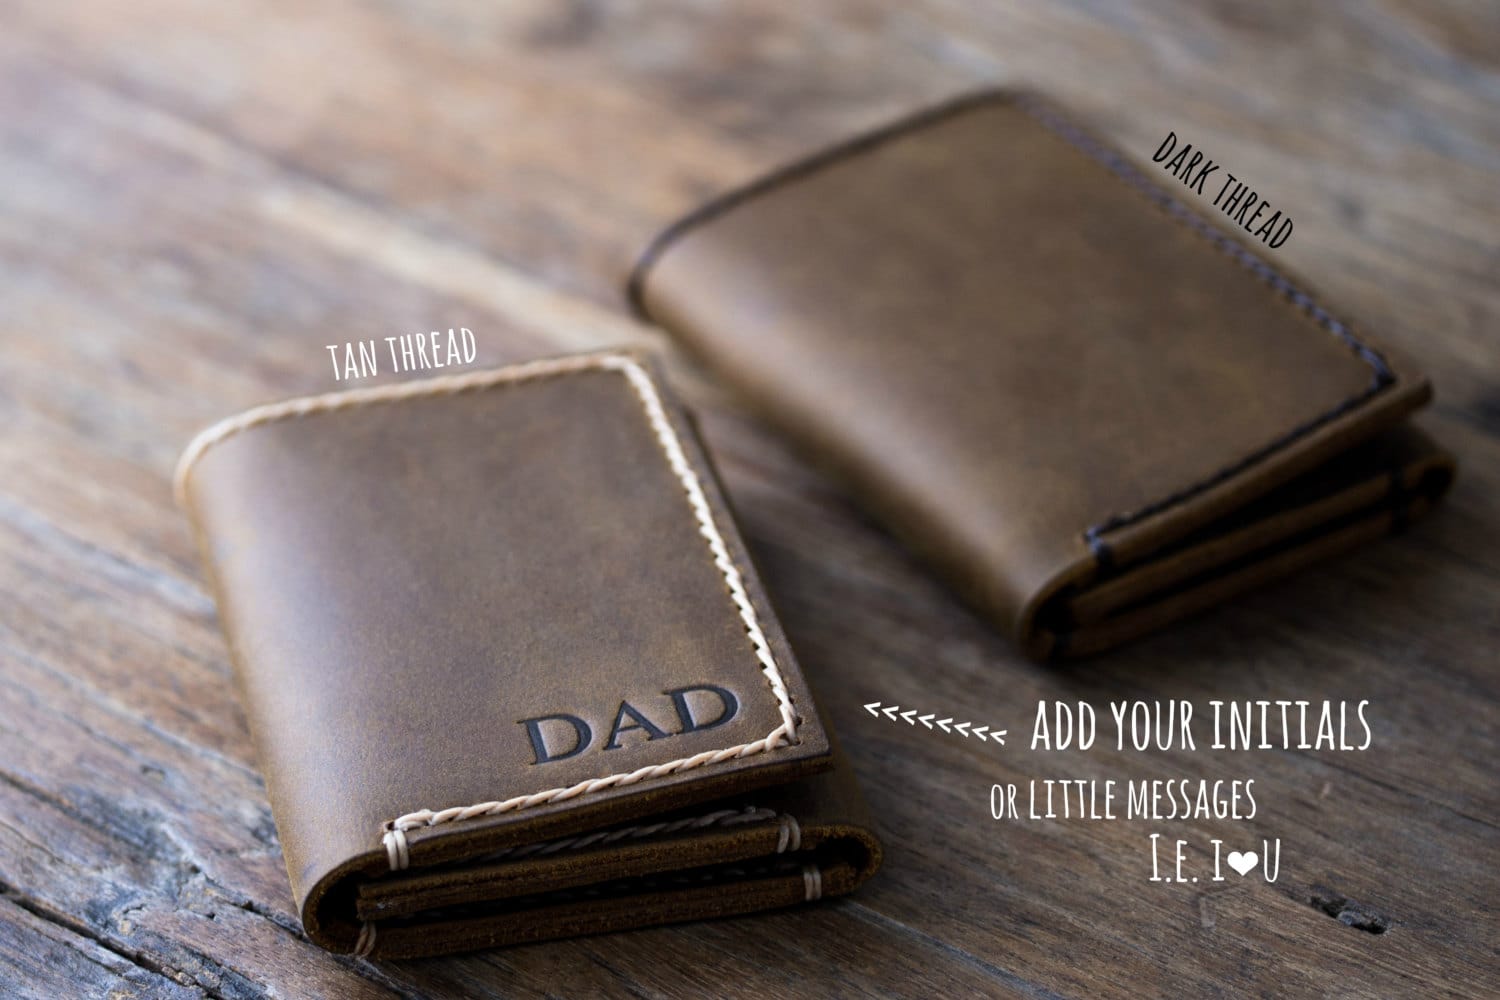 Mens Trifold Wallet [Personalized] [Handmade] [Free Shipping]